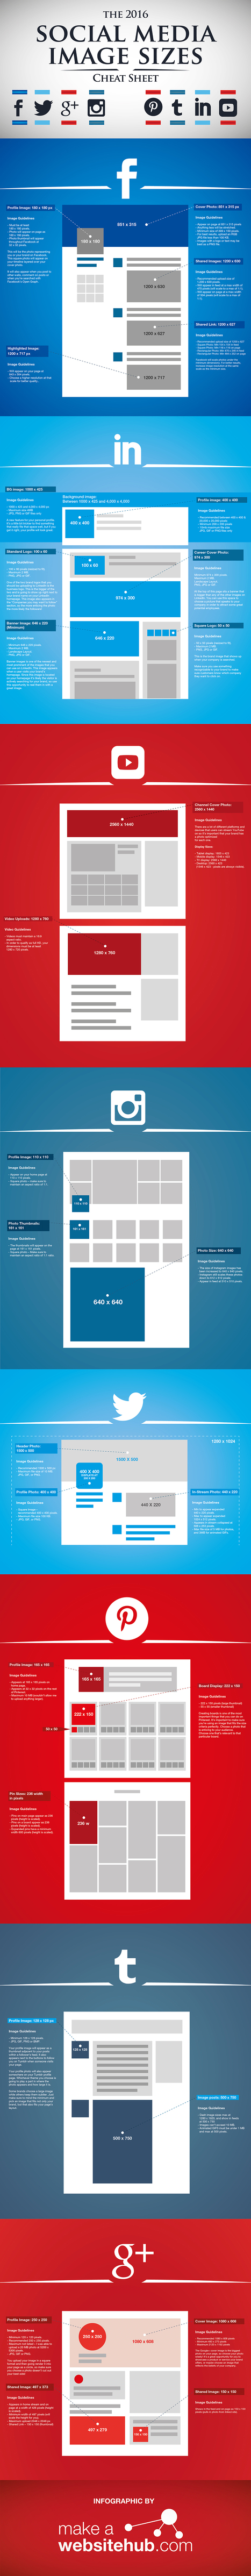 2016 Social Media Image Sizes Cheat Sheet | Font Lust & Graphic Desires | Scoop.it